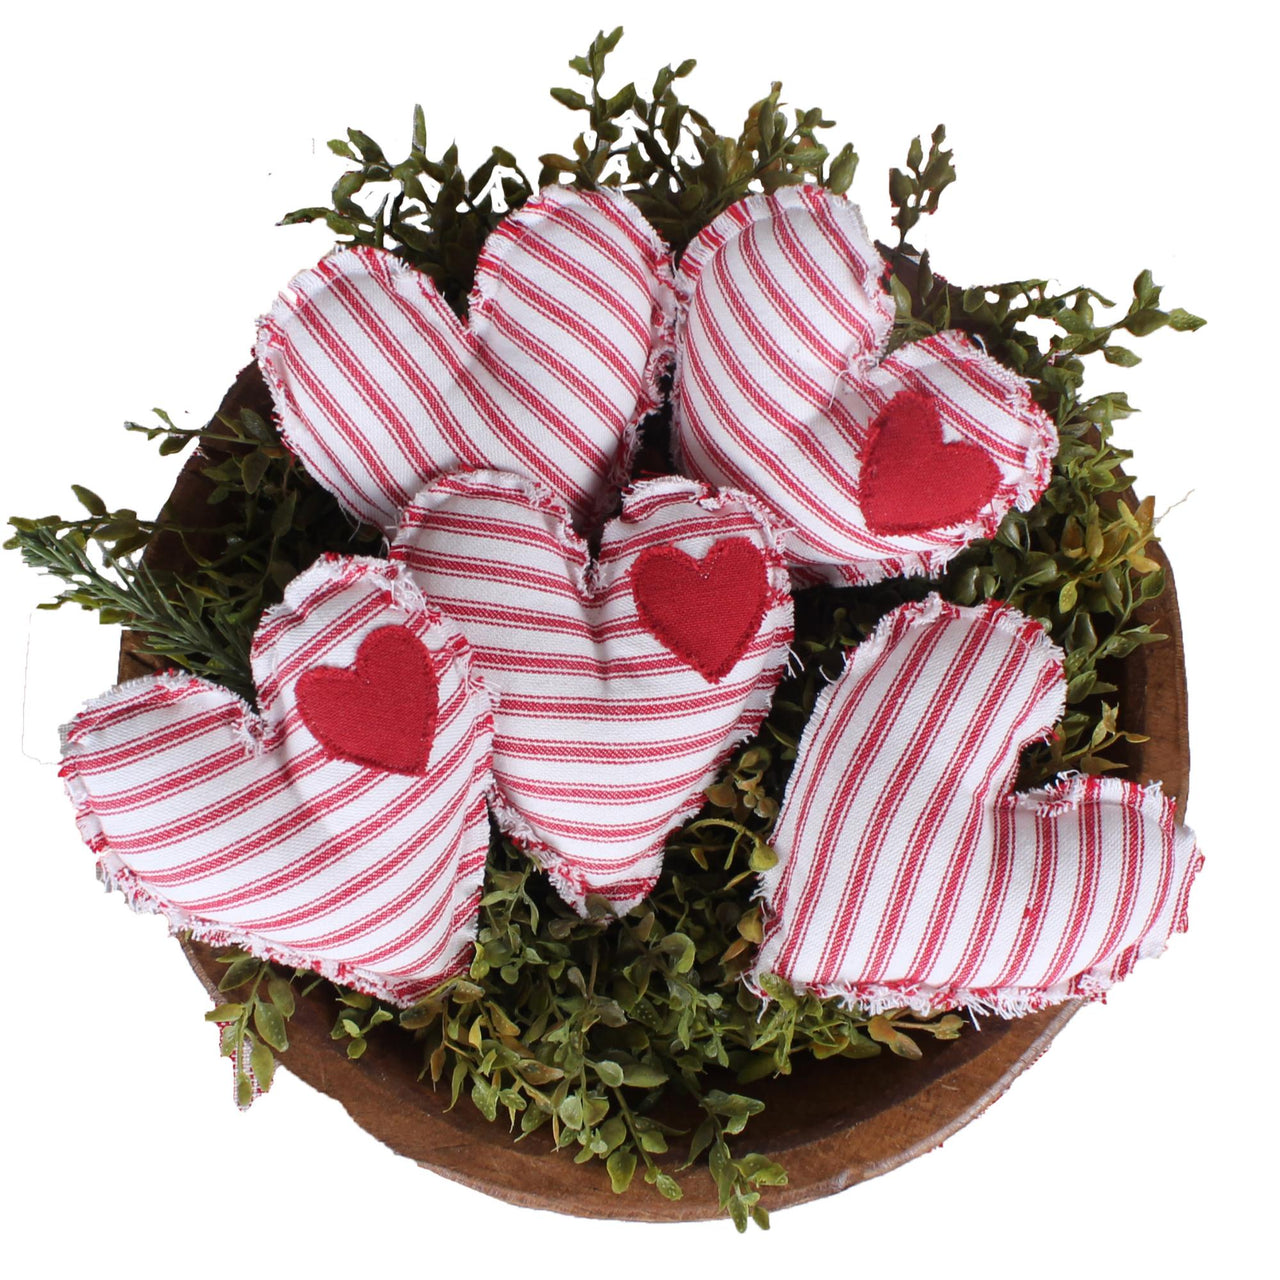 Sweethearts Fill Set of 5 - Interiors by Elizabeth